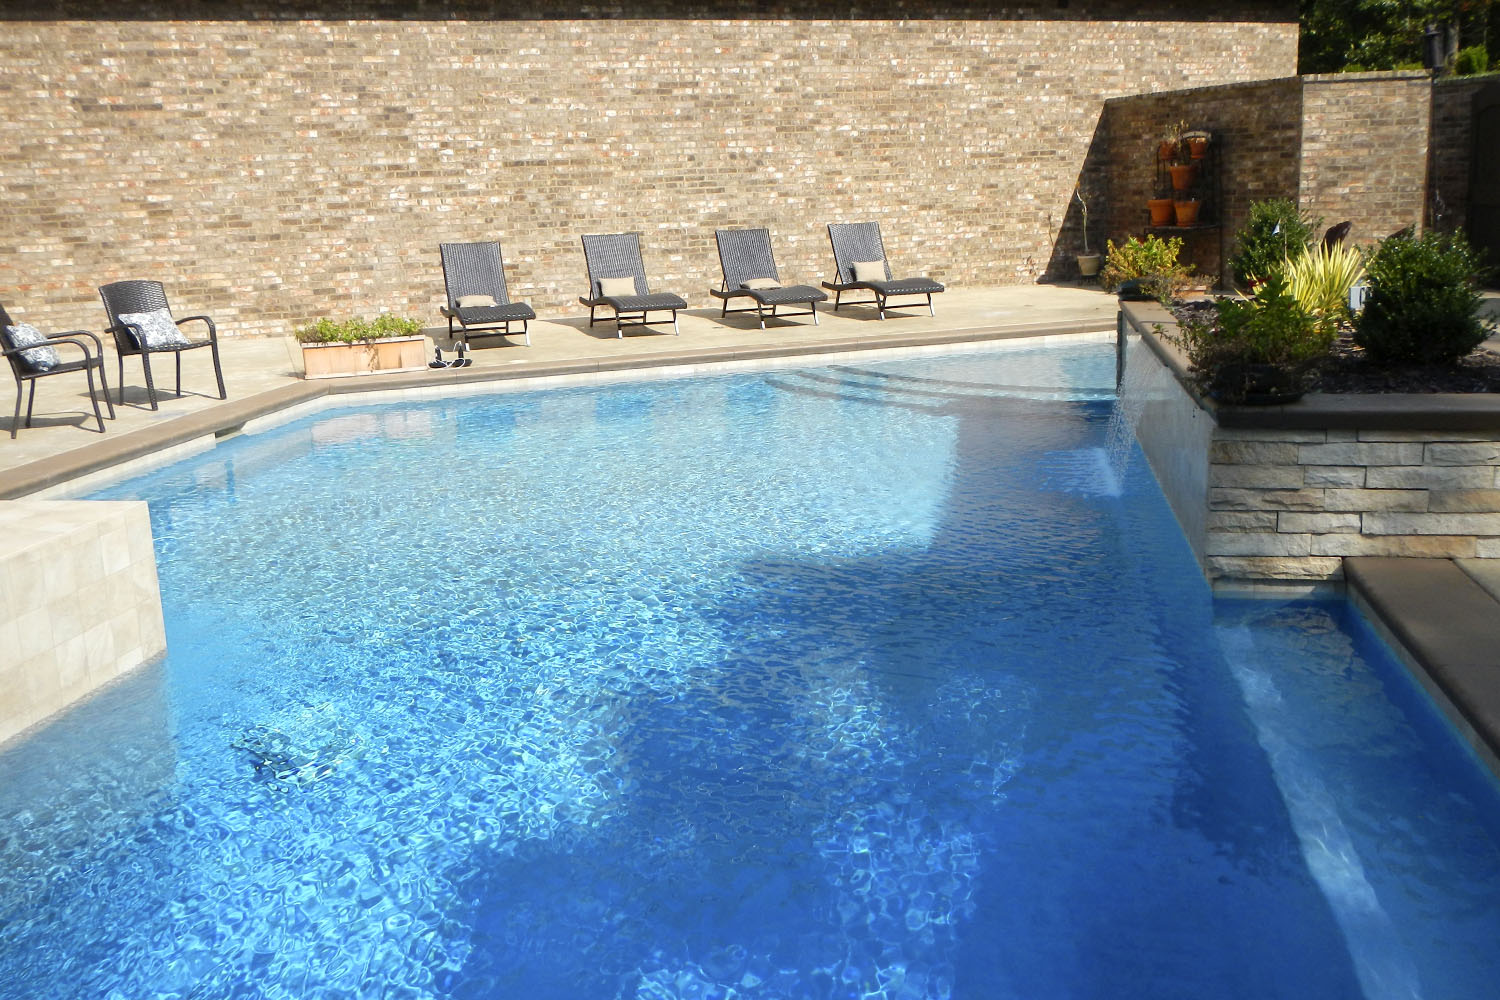 Clark & Sons Pools - Building highly efficient, eco-friendly pools since our inception.